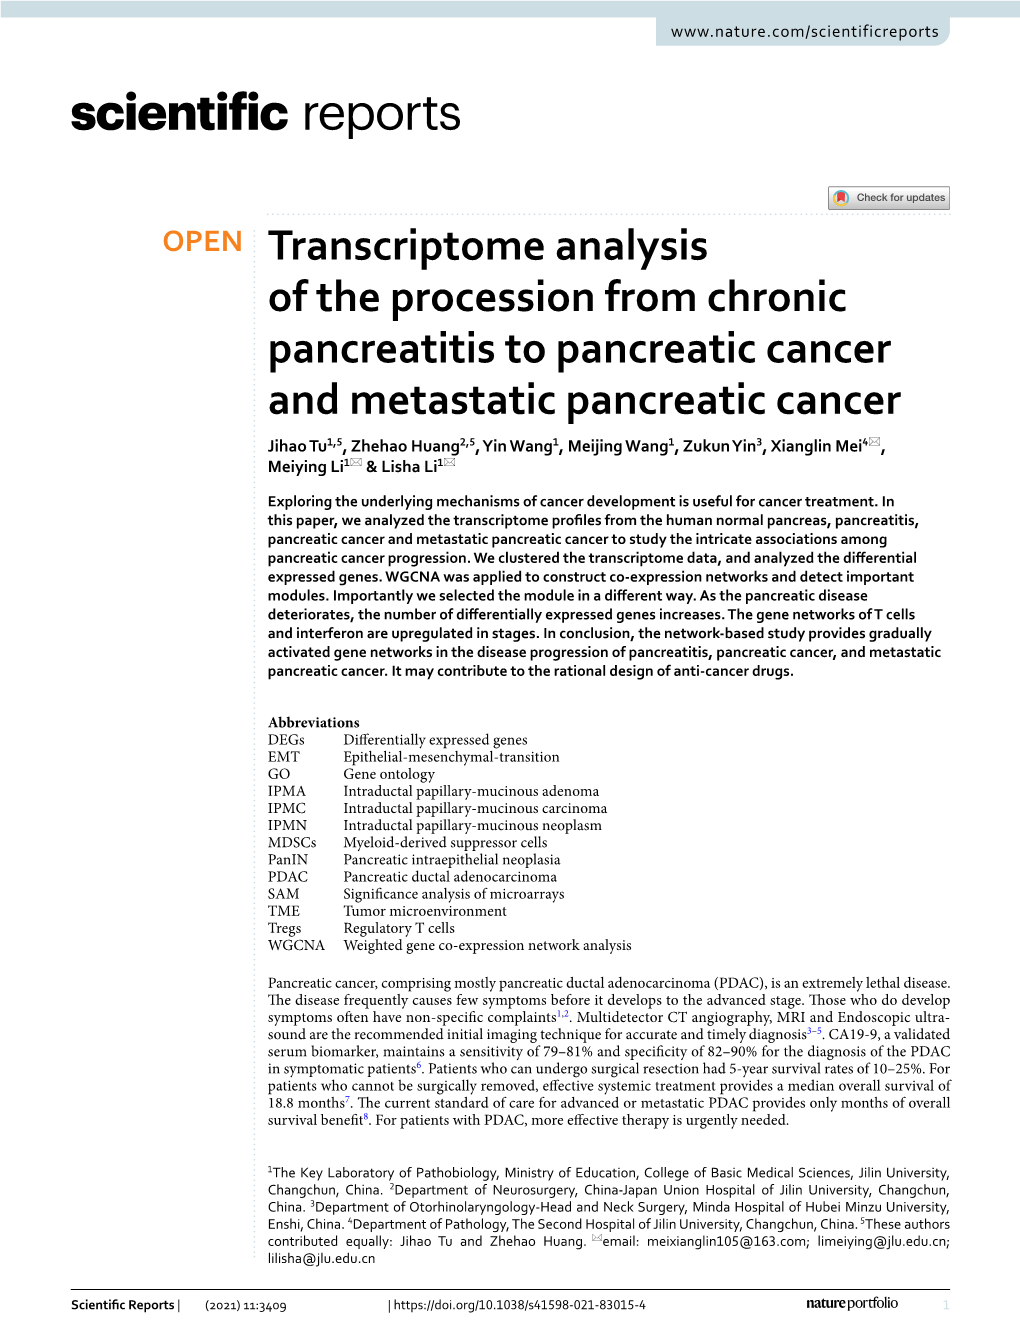 Transcriptome Analysis of the Procession from Chronic